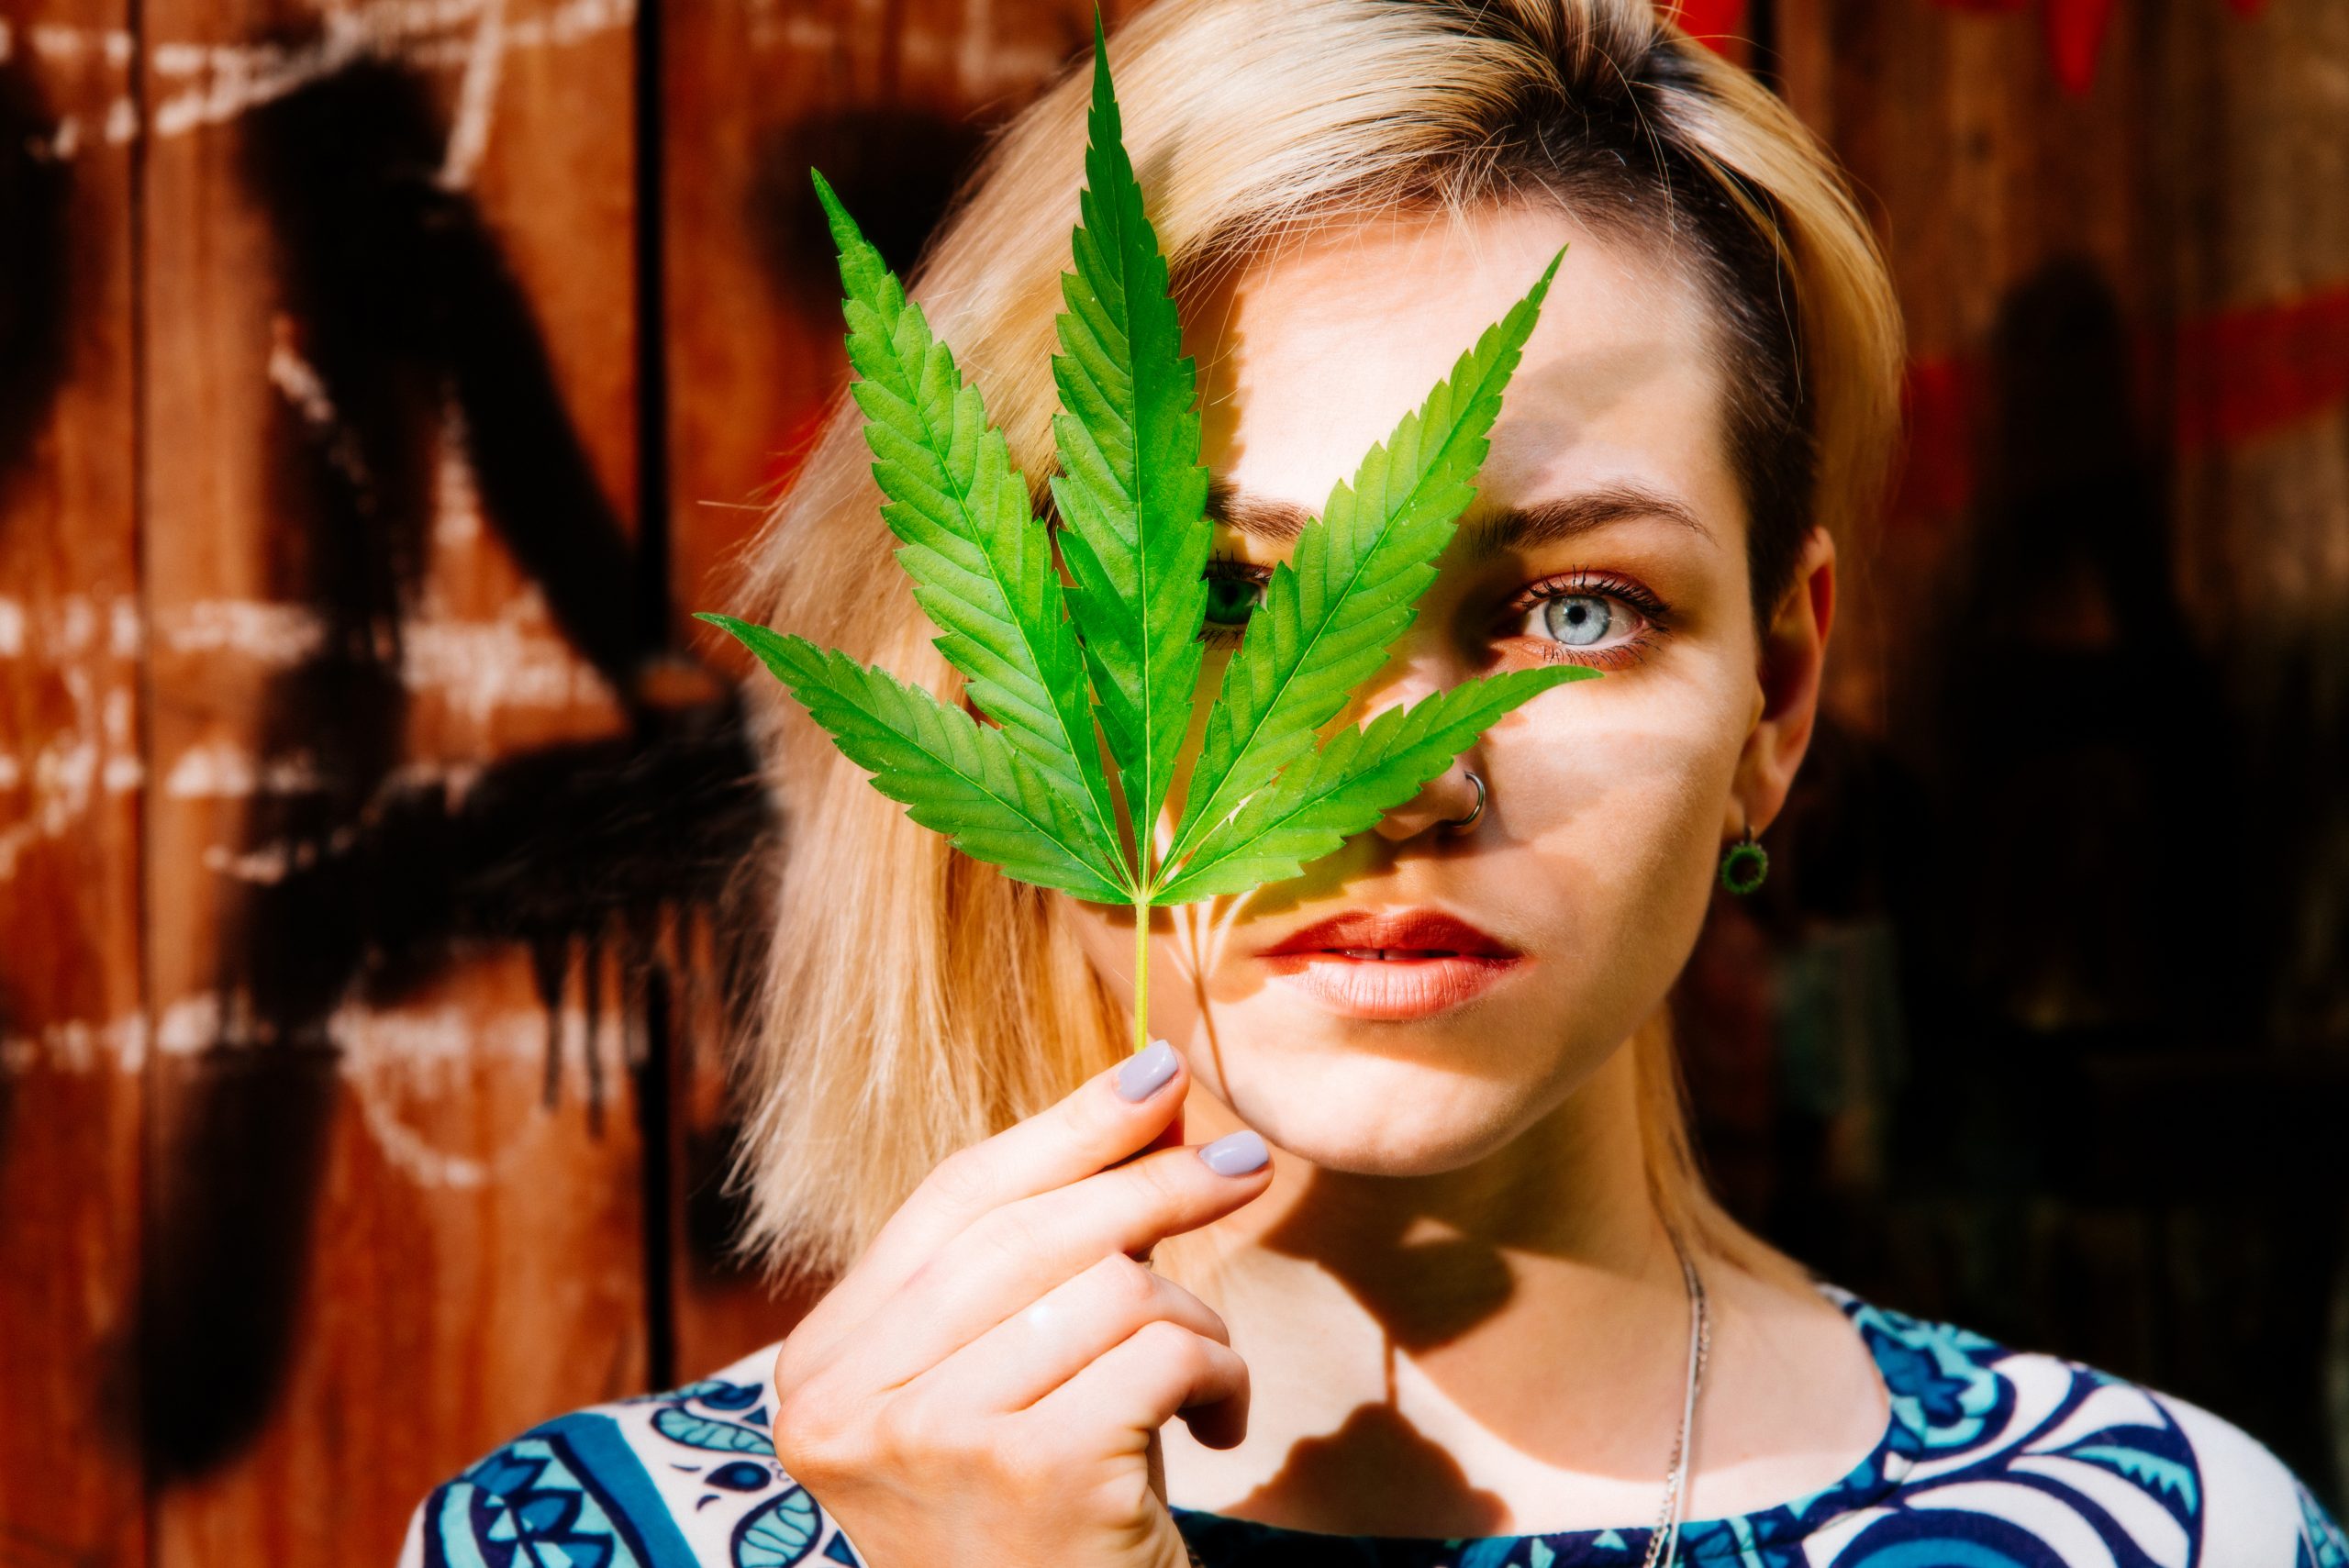 GIRL AND CANNABIS PLANT 164221597 1 scaled 1 | Cognitive function